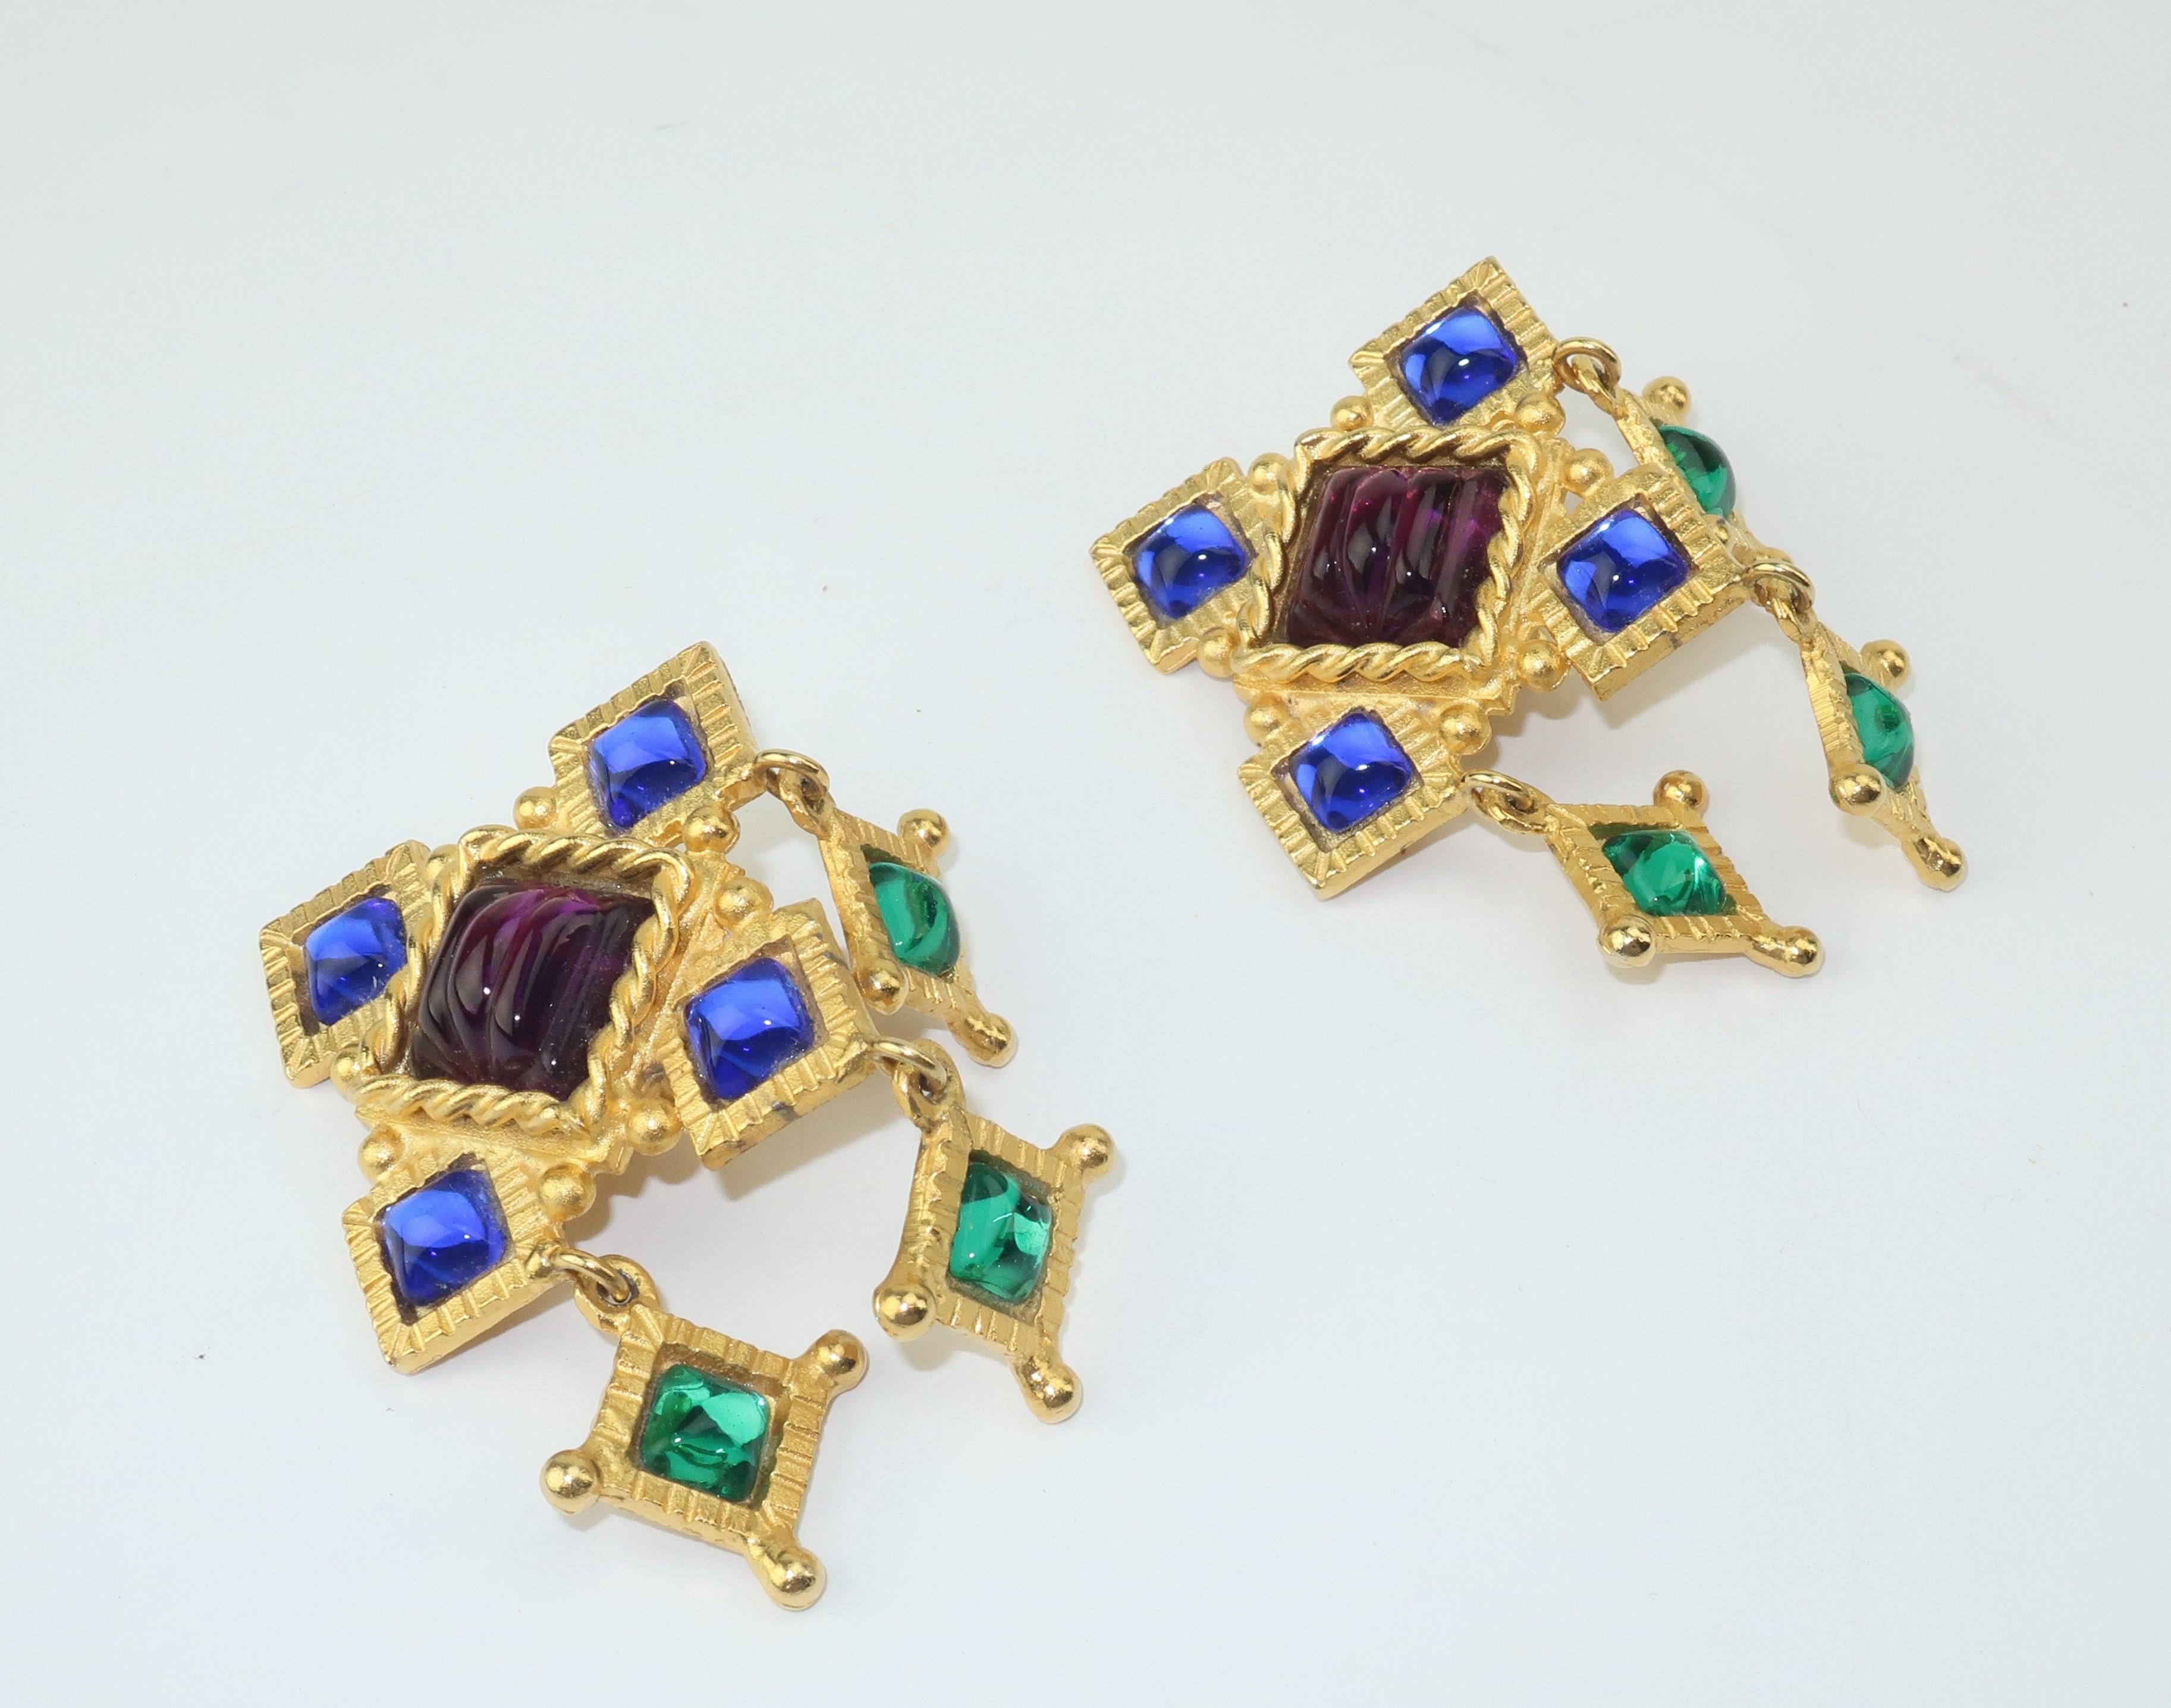 Women's Gerard Yosca Gold Earrings With Cabochon Glass Stones